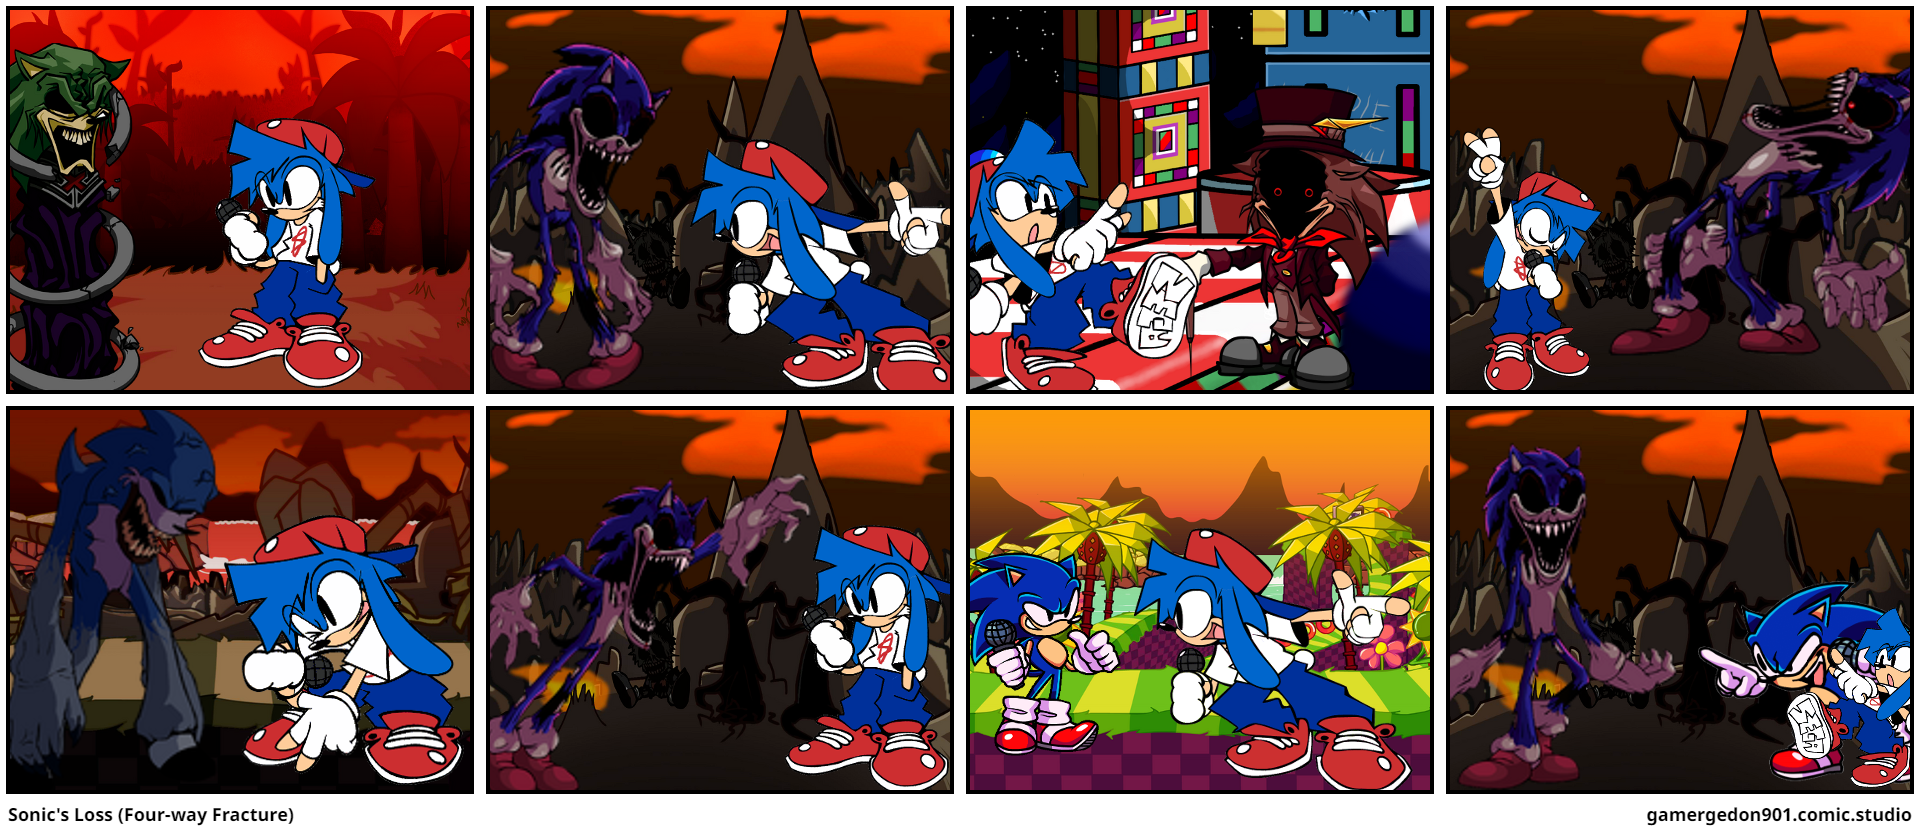 Sonic's Loss (Four-way Fracture)